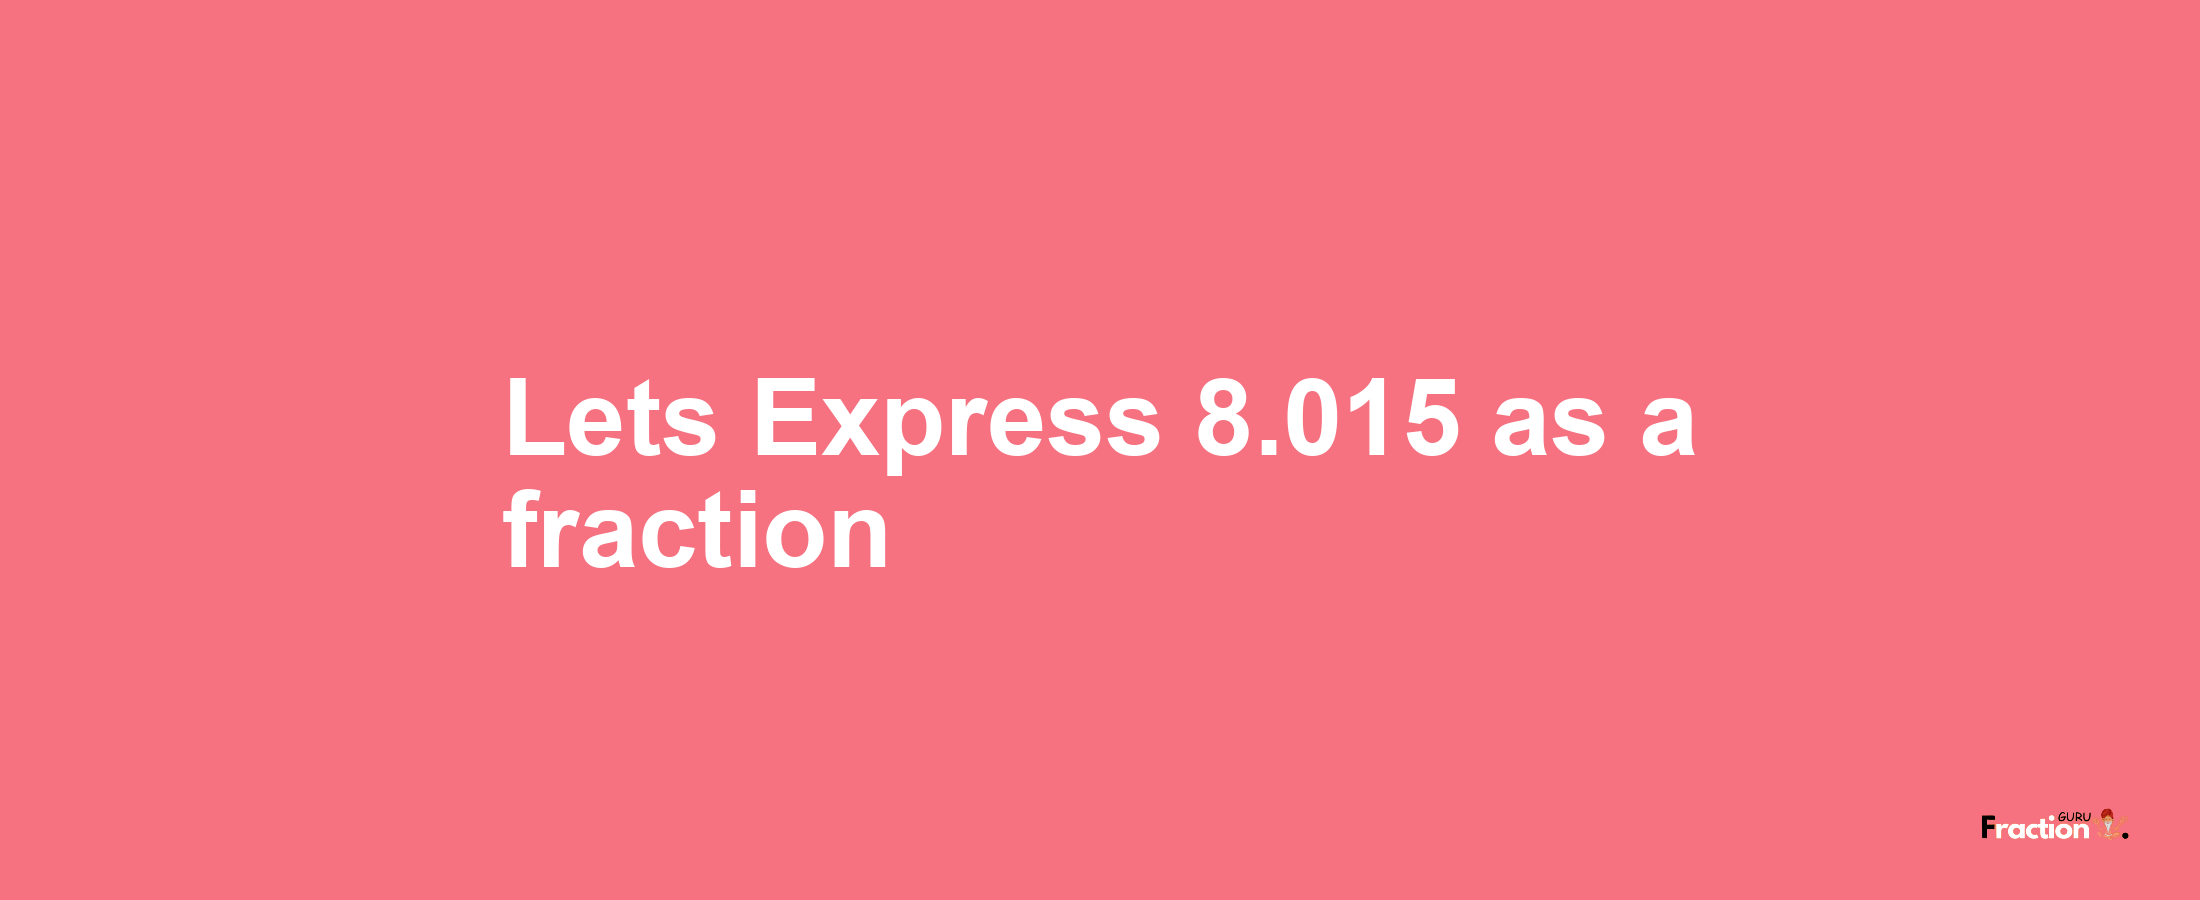 Lets Express 8.015 as afraction